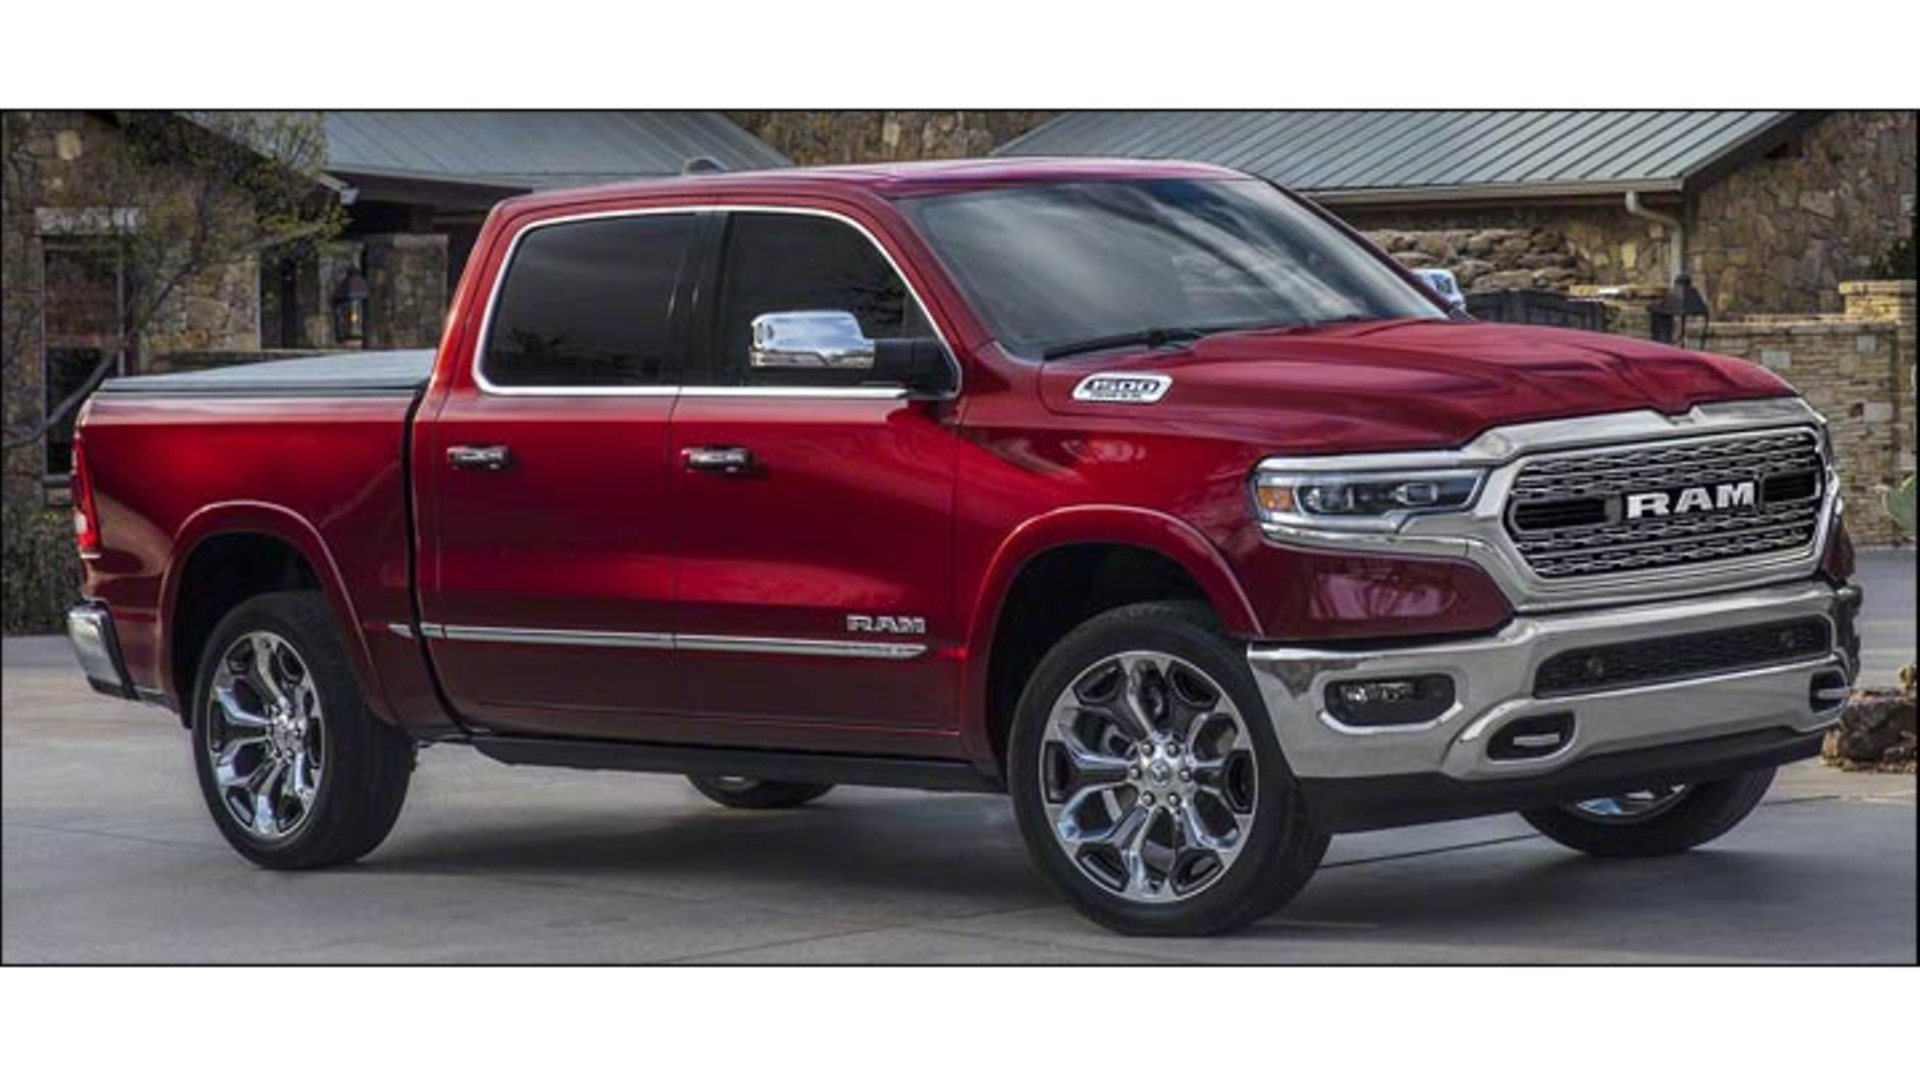 The 2019 Ram 1500 features Henkel Adhesive Technologies products in its all-new design.